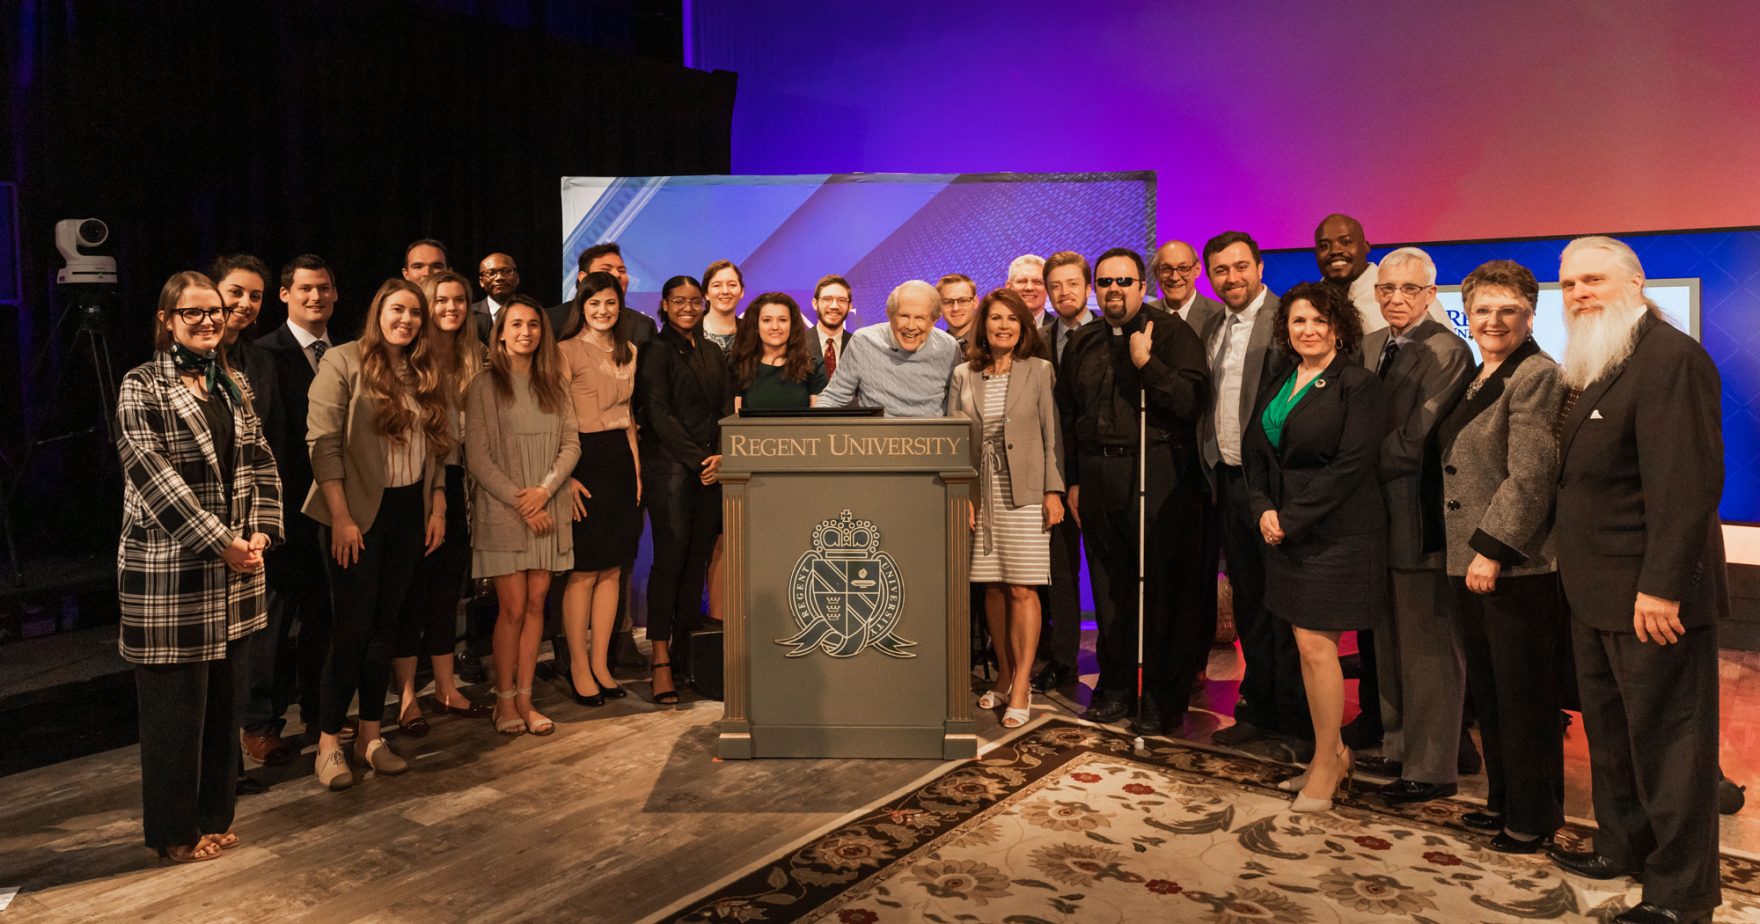 Dr. M.G. Pat Robertson with Dean Michele Bachmann and participants at the Chancellor’s Forum for Regent University’s Robertson School of Government, Virginia Beach, VA.